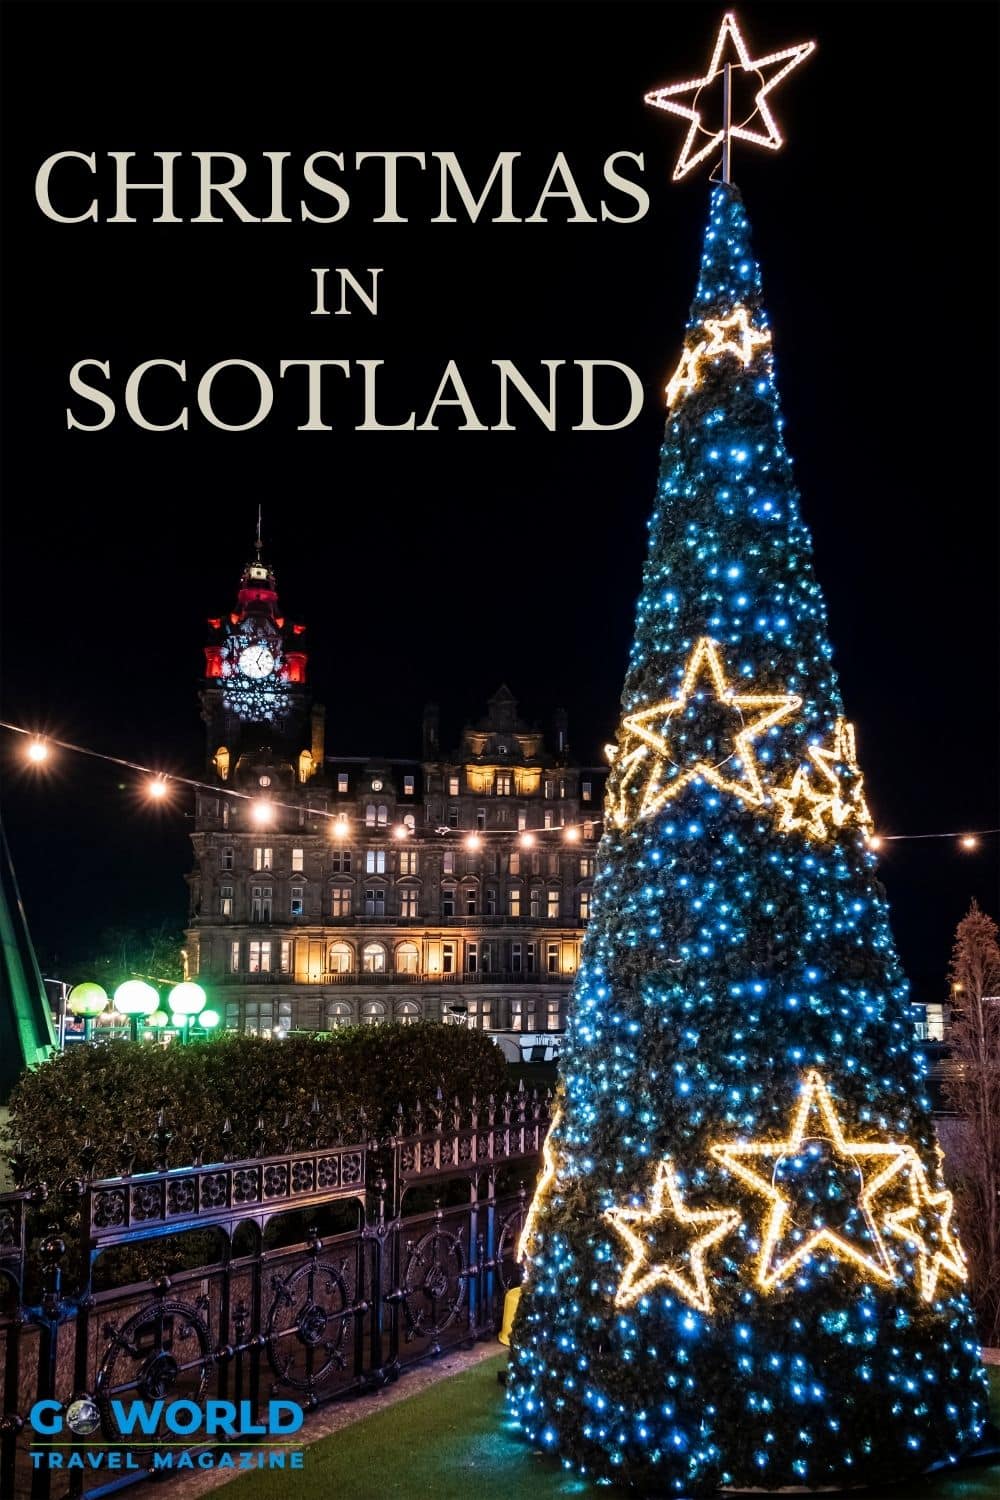 Christmas in Scotland is a colorful and lively affair. Here's how to enjoy all the festivies including the fun Hogmanay New Year Celebrations. #Scotland #Christmasinscotland